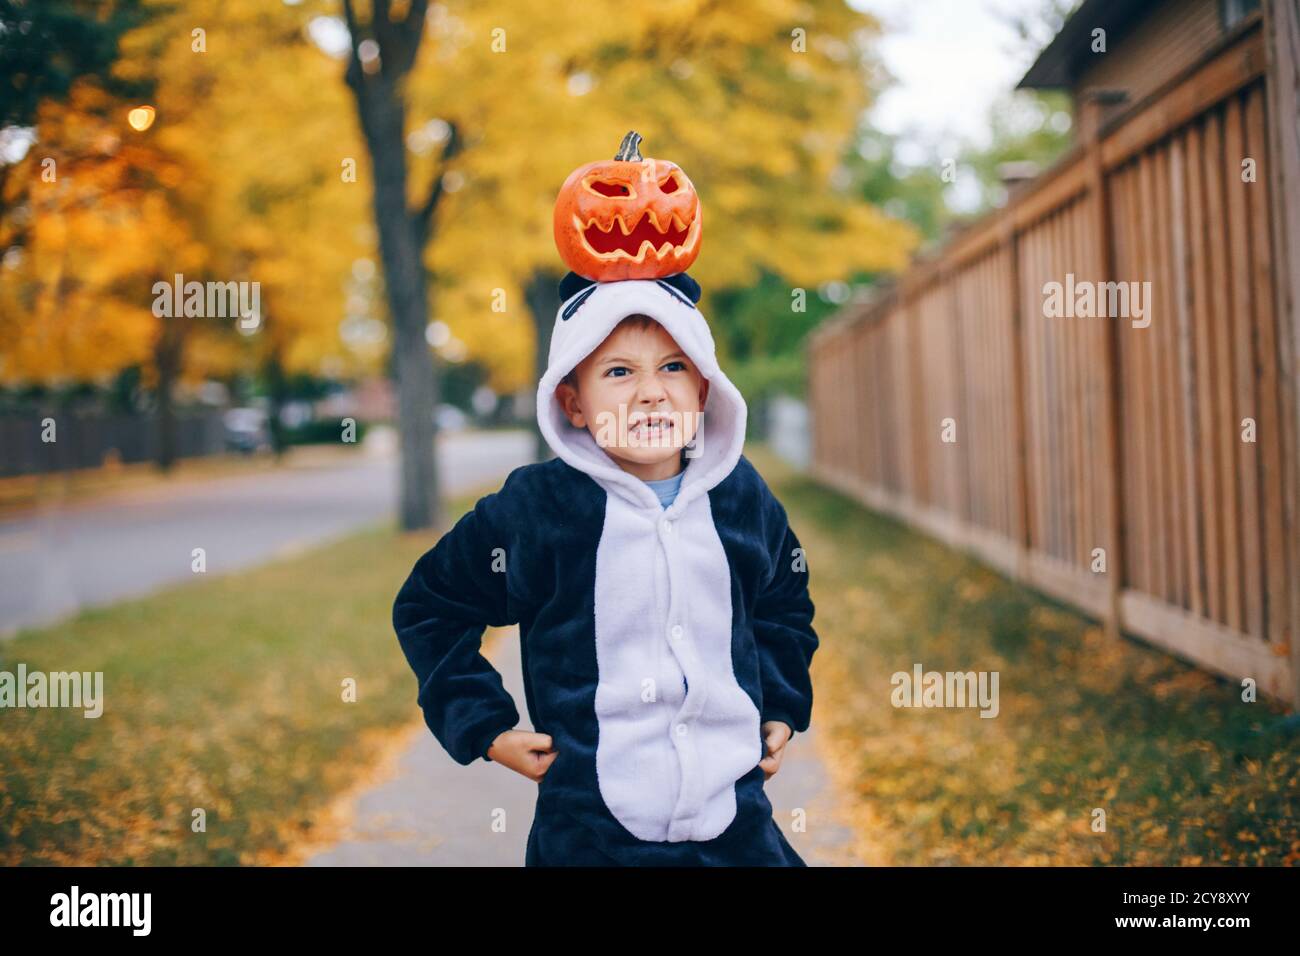 Trick or treat. Funny grumpy angry child boy with red pumpkin on head. Kid going to trick or treat on Halloween holiday. Adorable mad boy in party pan Stock Photo